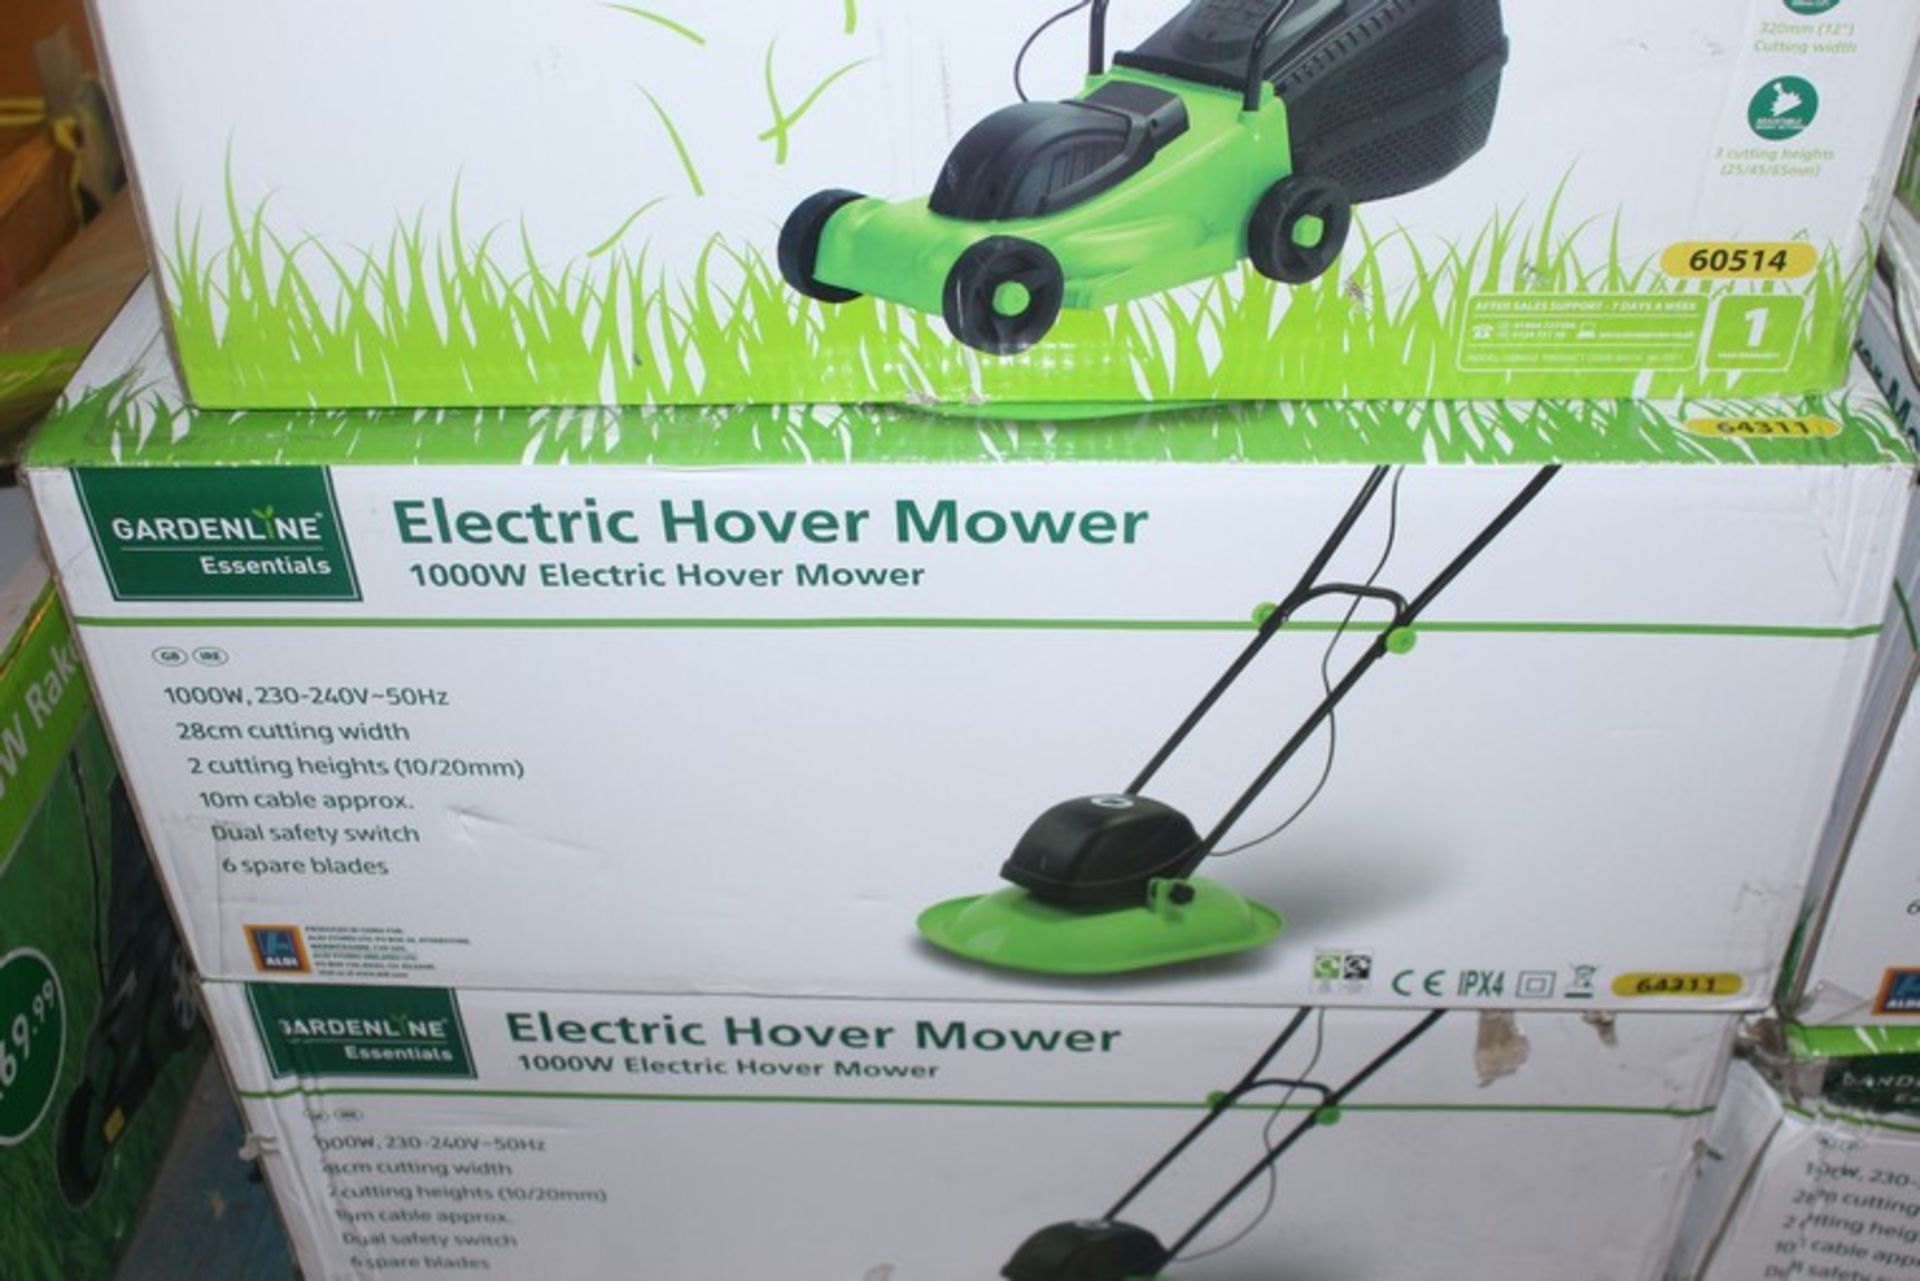 1 x BOXED GARDEN LINE ELECTRIC HOVER MOWER (16.11.17) *PLEASE NOTE THAT THE BID PRICE IS